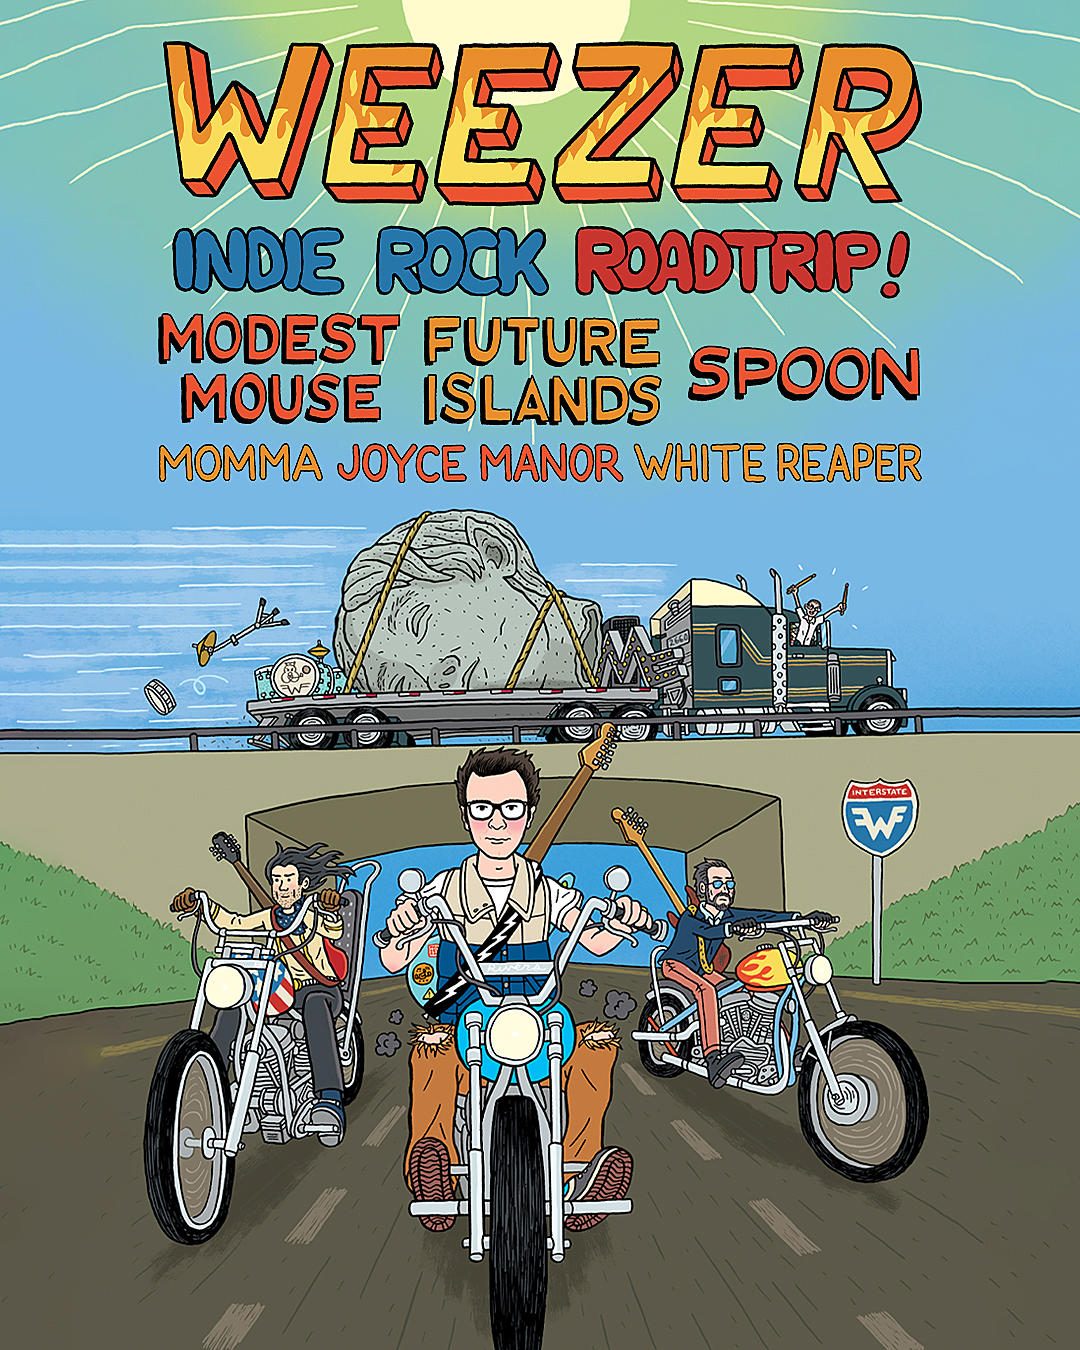 Weezer Surprise Show at the Roxy on March 16 mxdwn Music